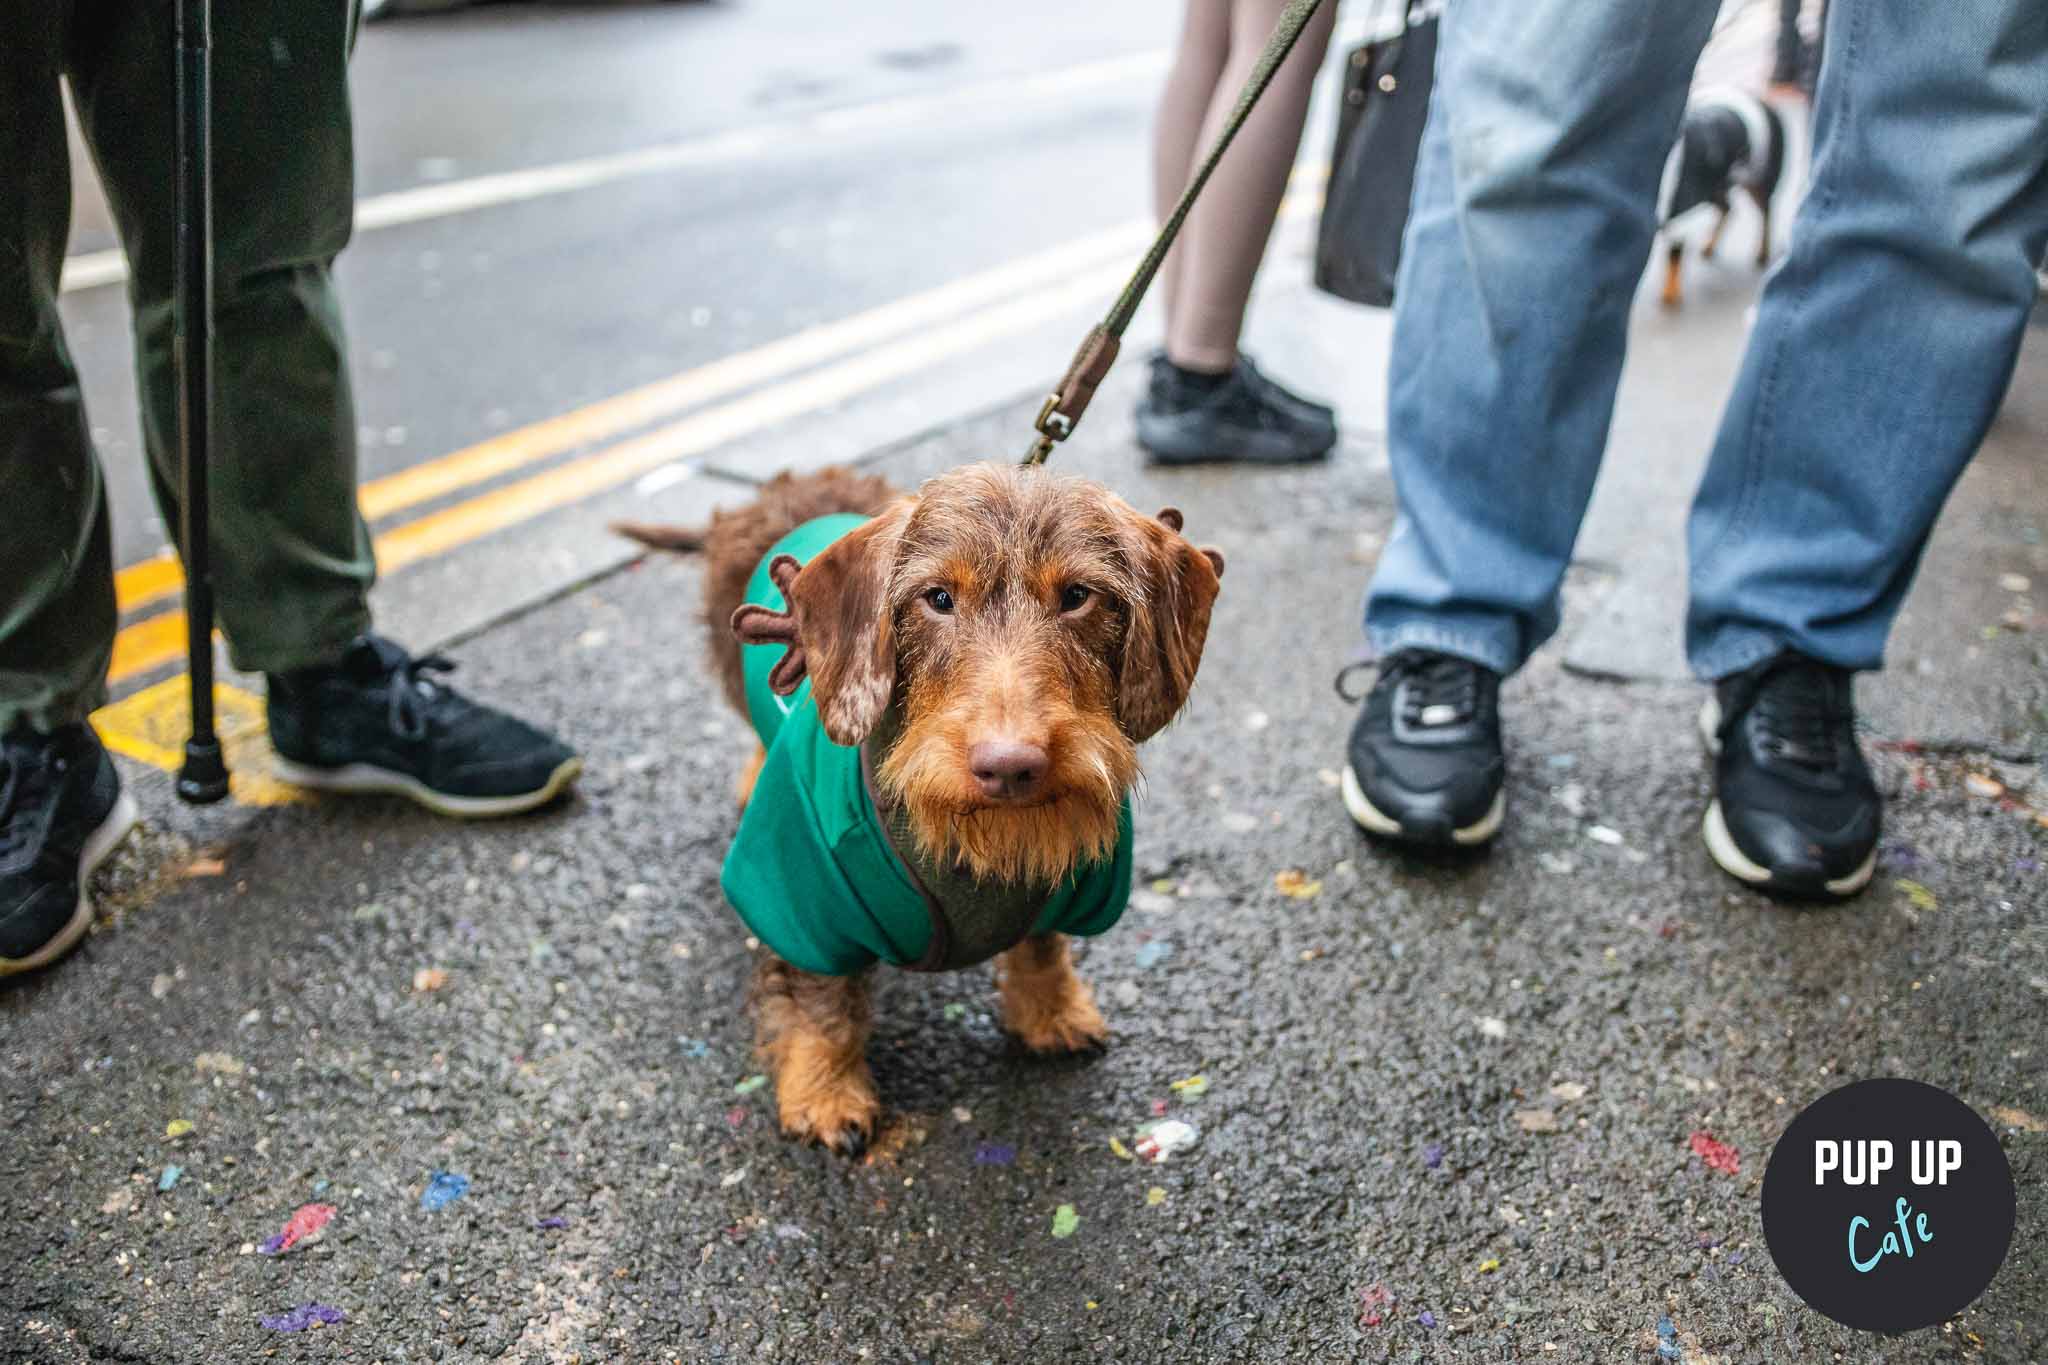 A dachshund in a green Christmas outfit waits to go into the event